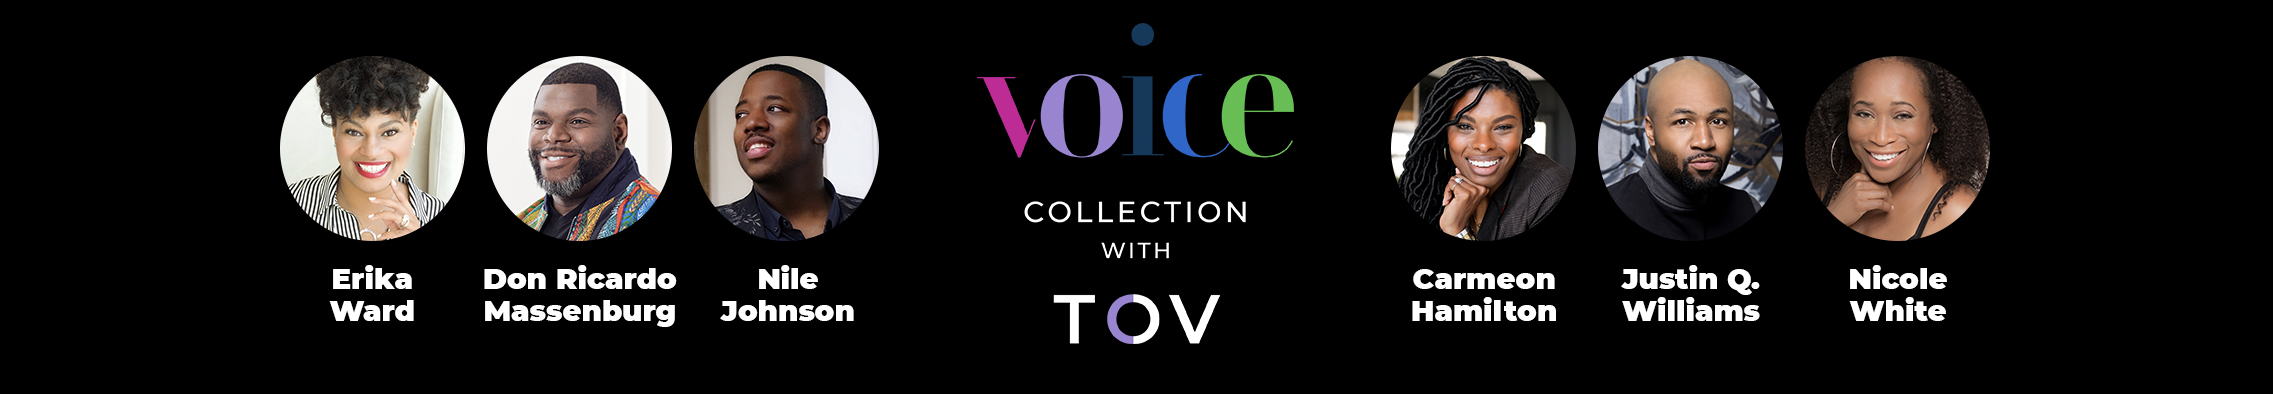 The Voice Collection